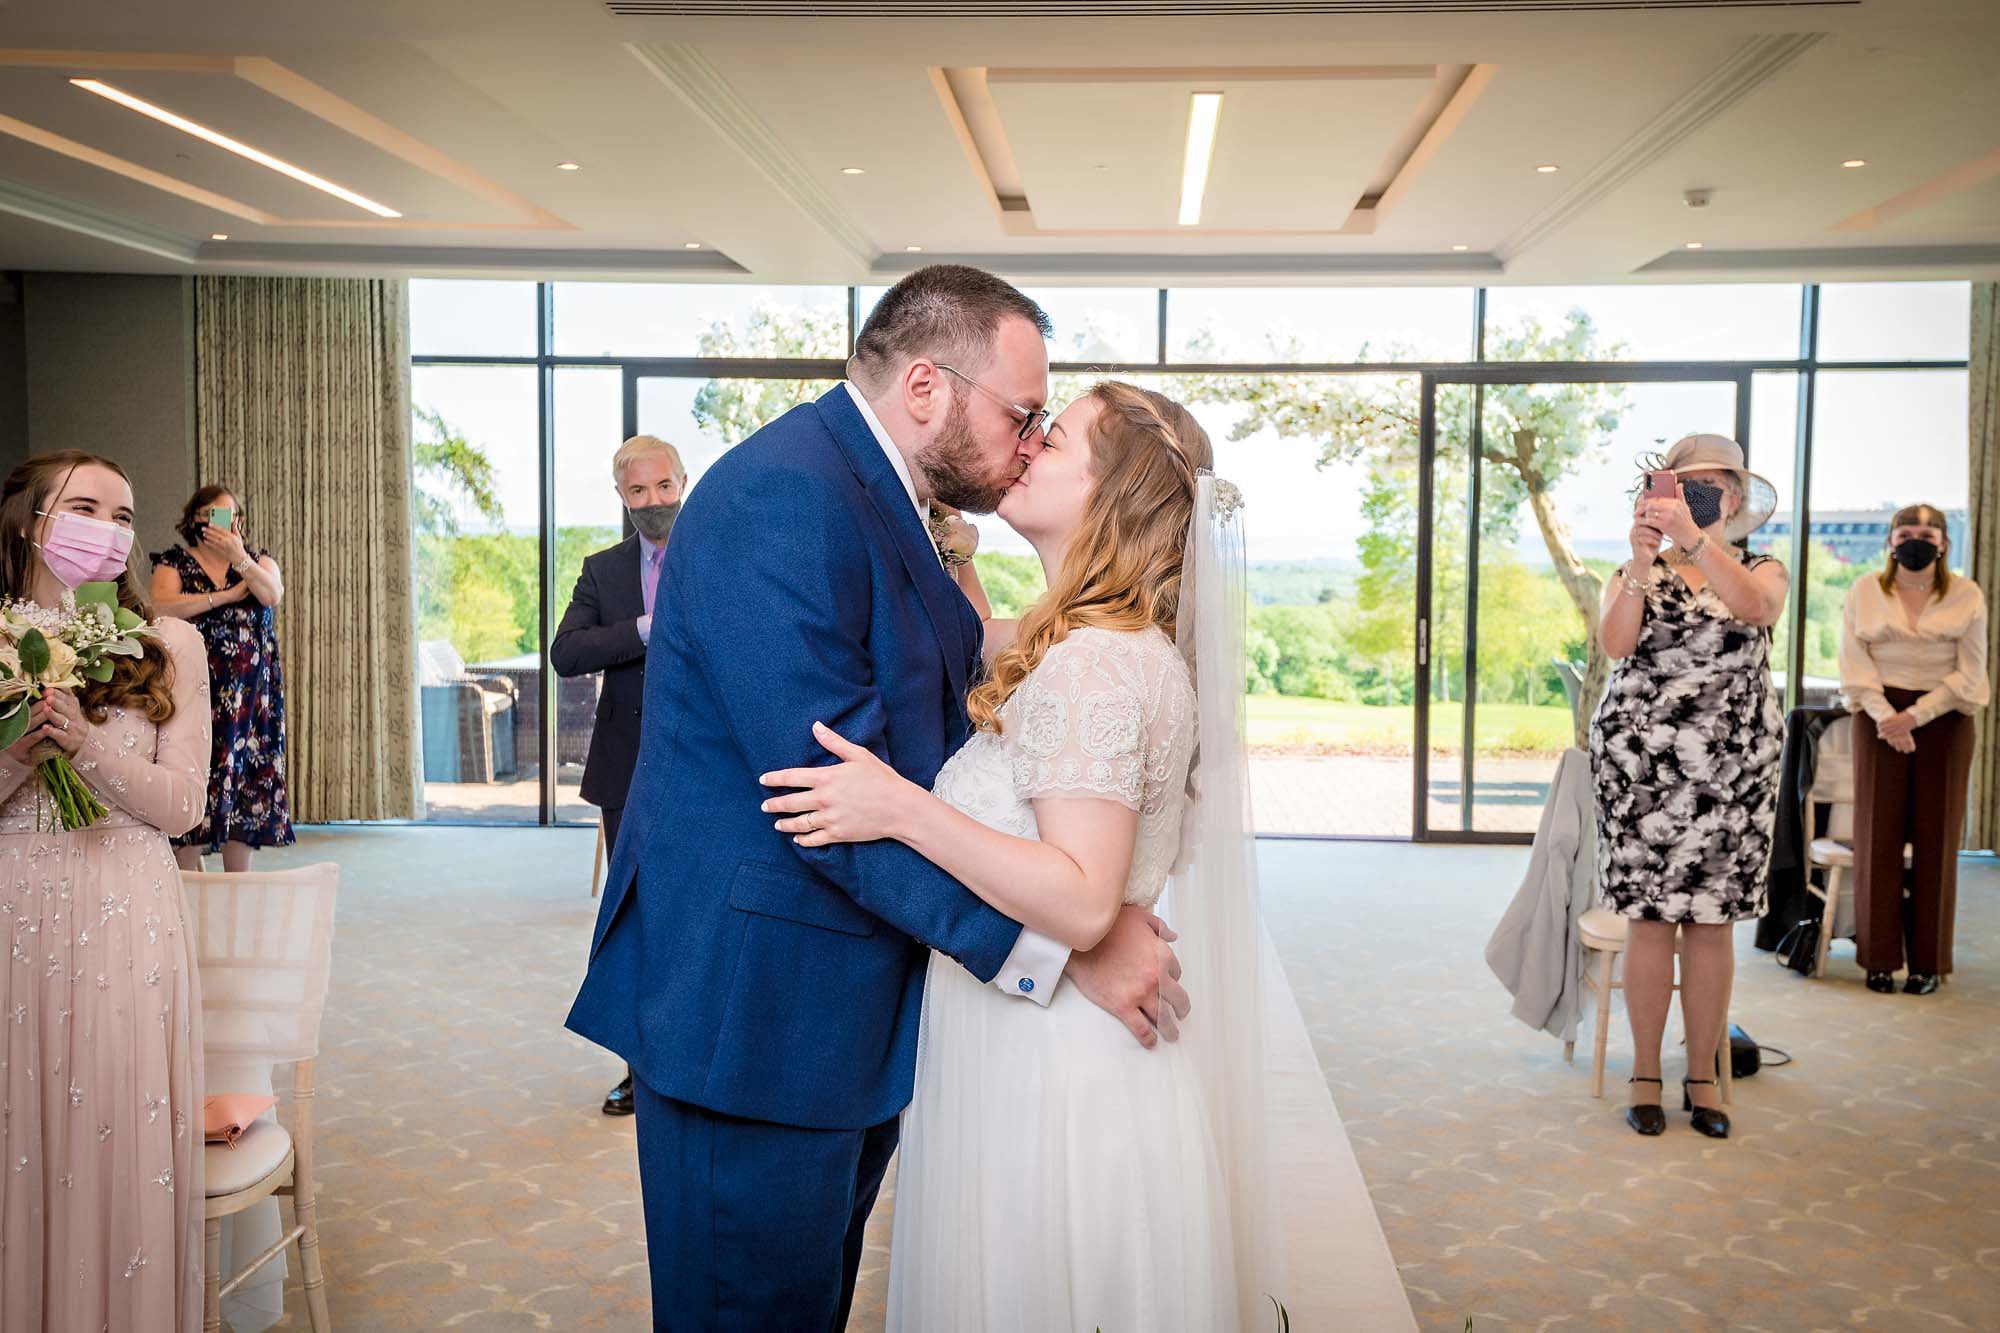 The bride and groom share their first kiss in the Via Julia Suite at Celtic Manor Resort, Newport